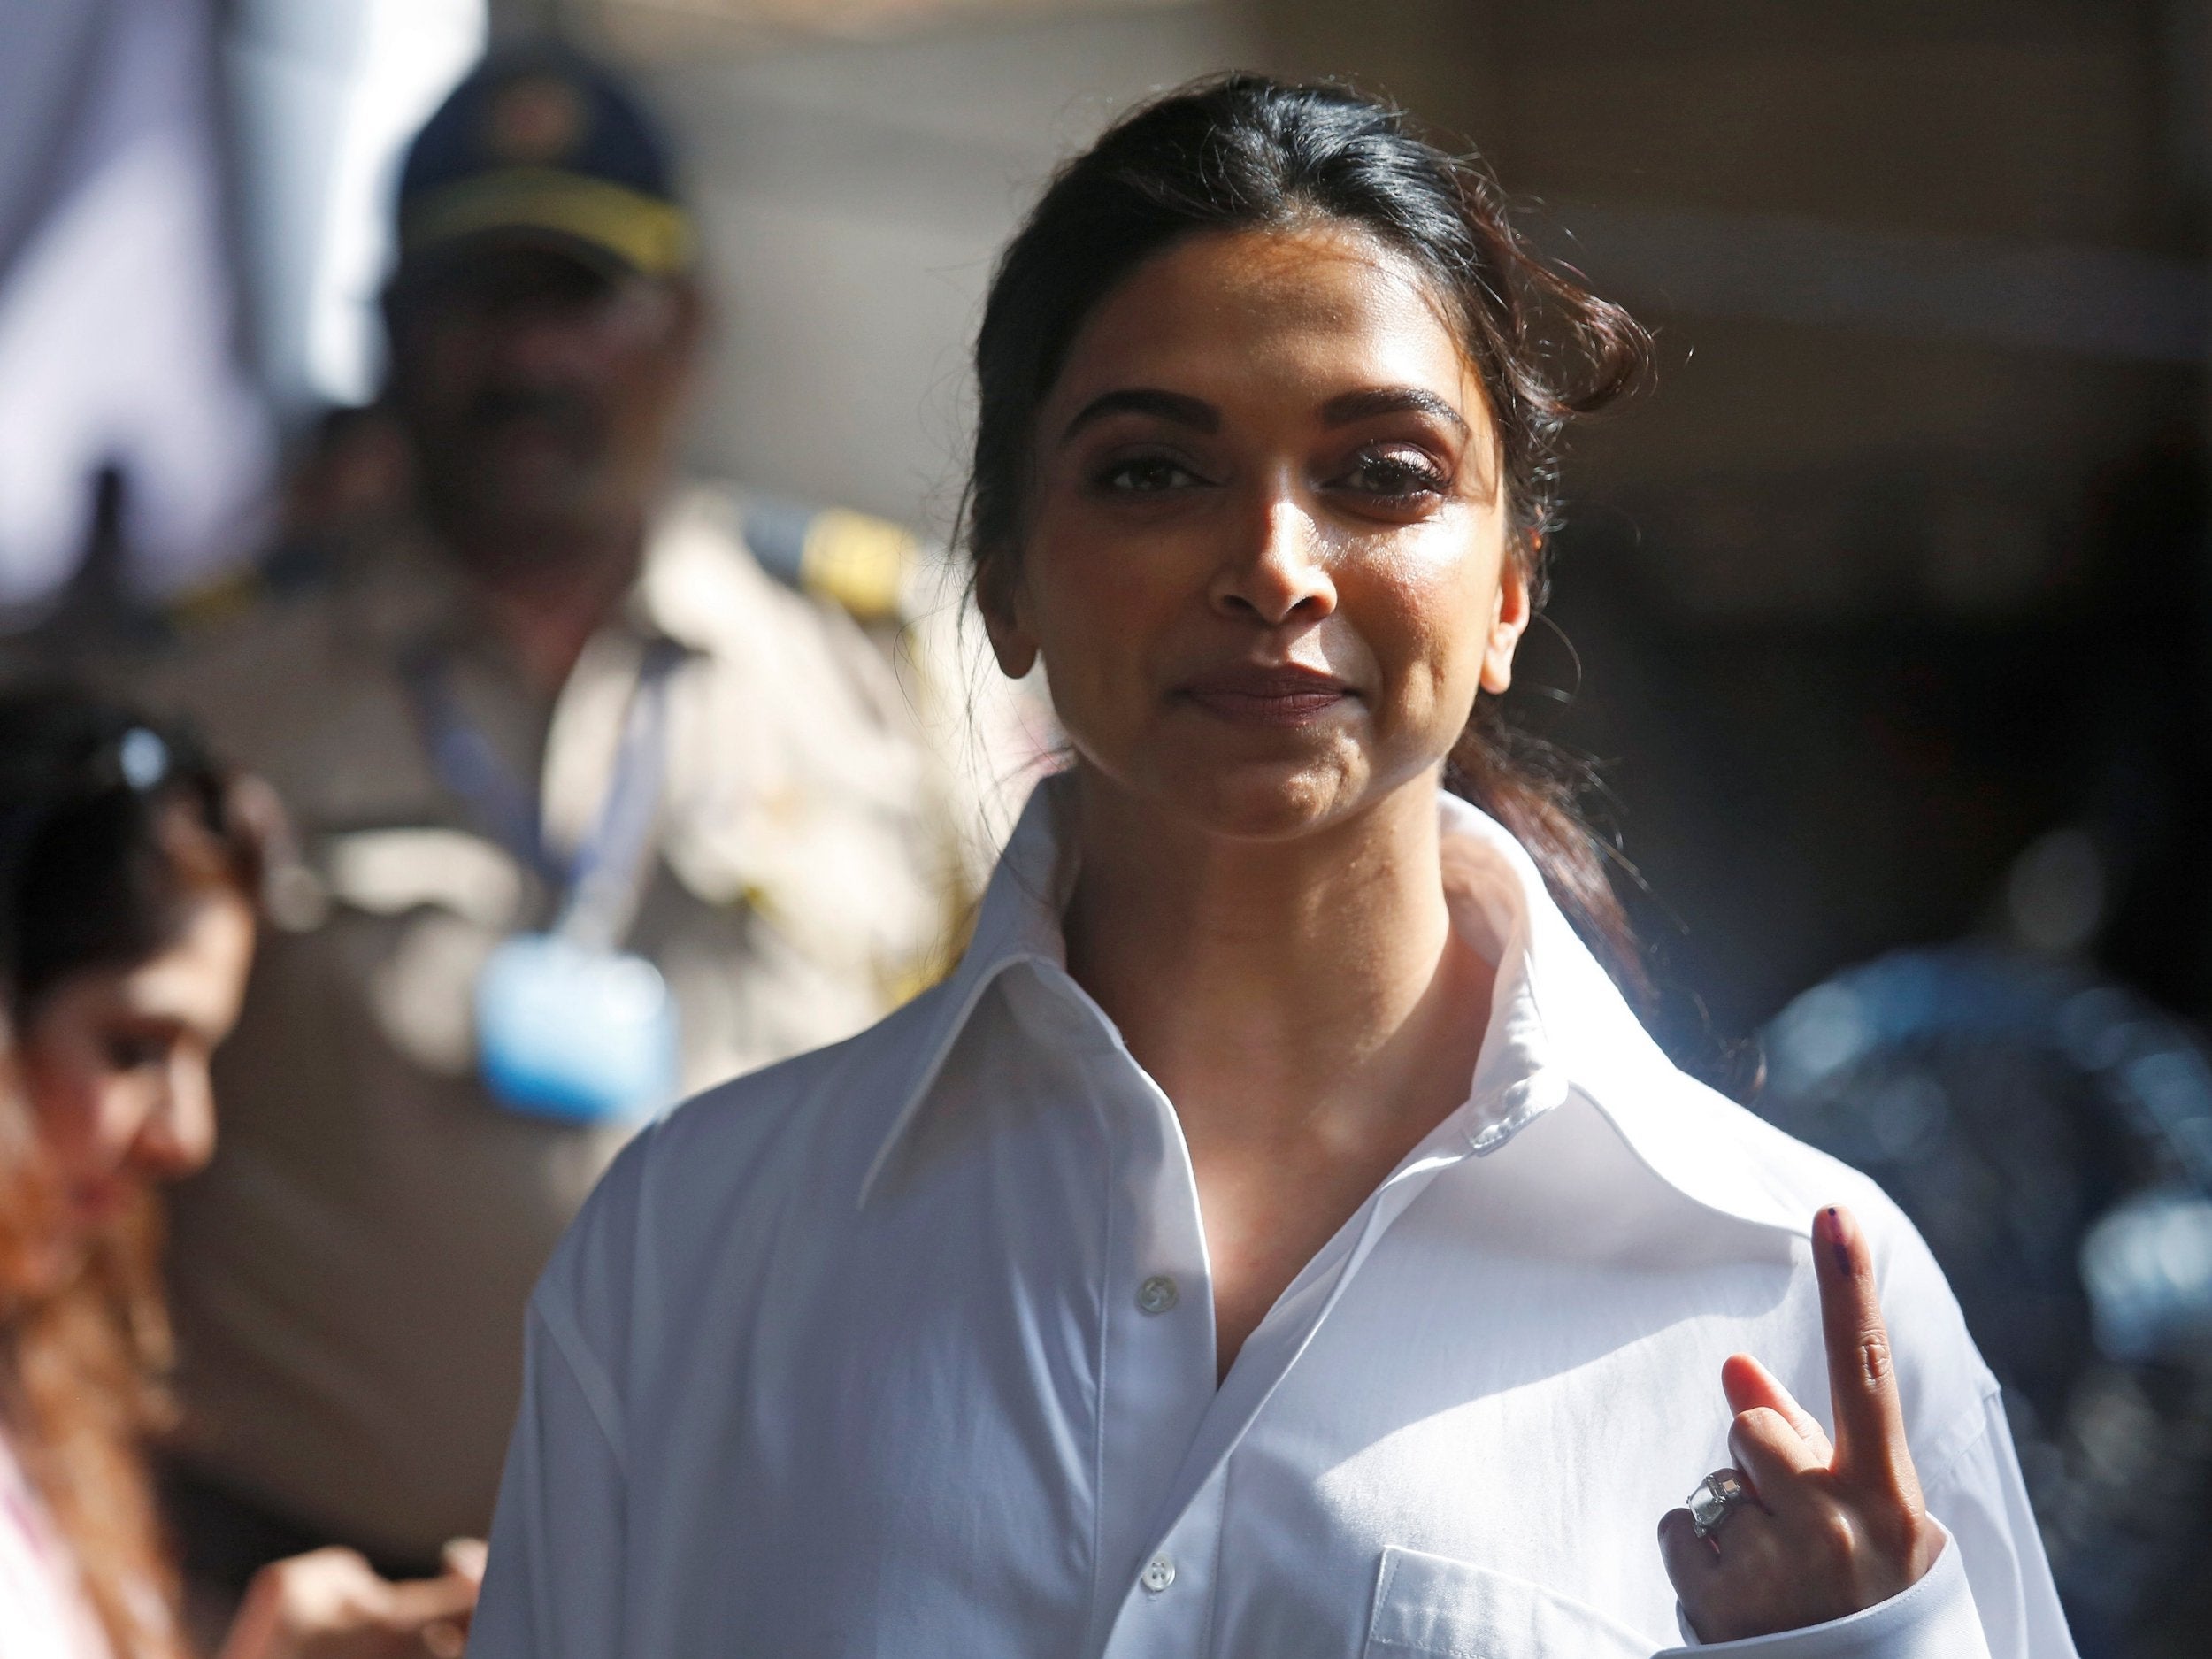 Bollywood’s highest-paid actress, Deepika Padukone, shows an ink mark on her finger after casting her vote at a polling station in Mumbai (Reuters)